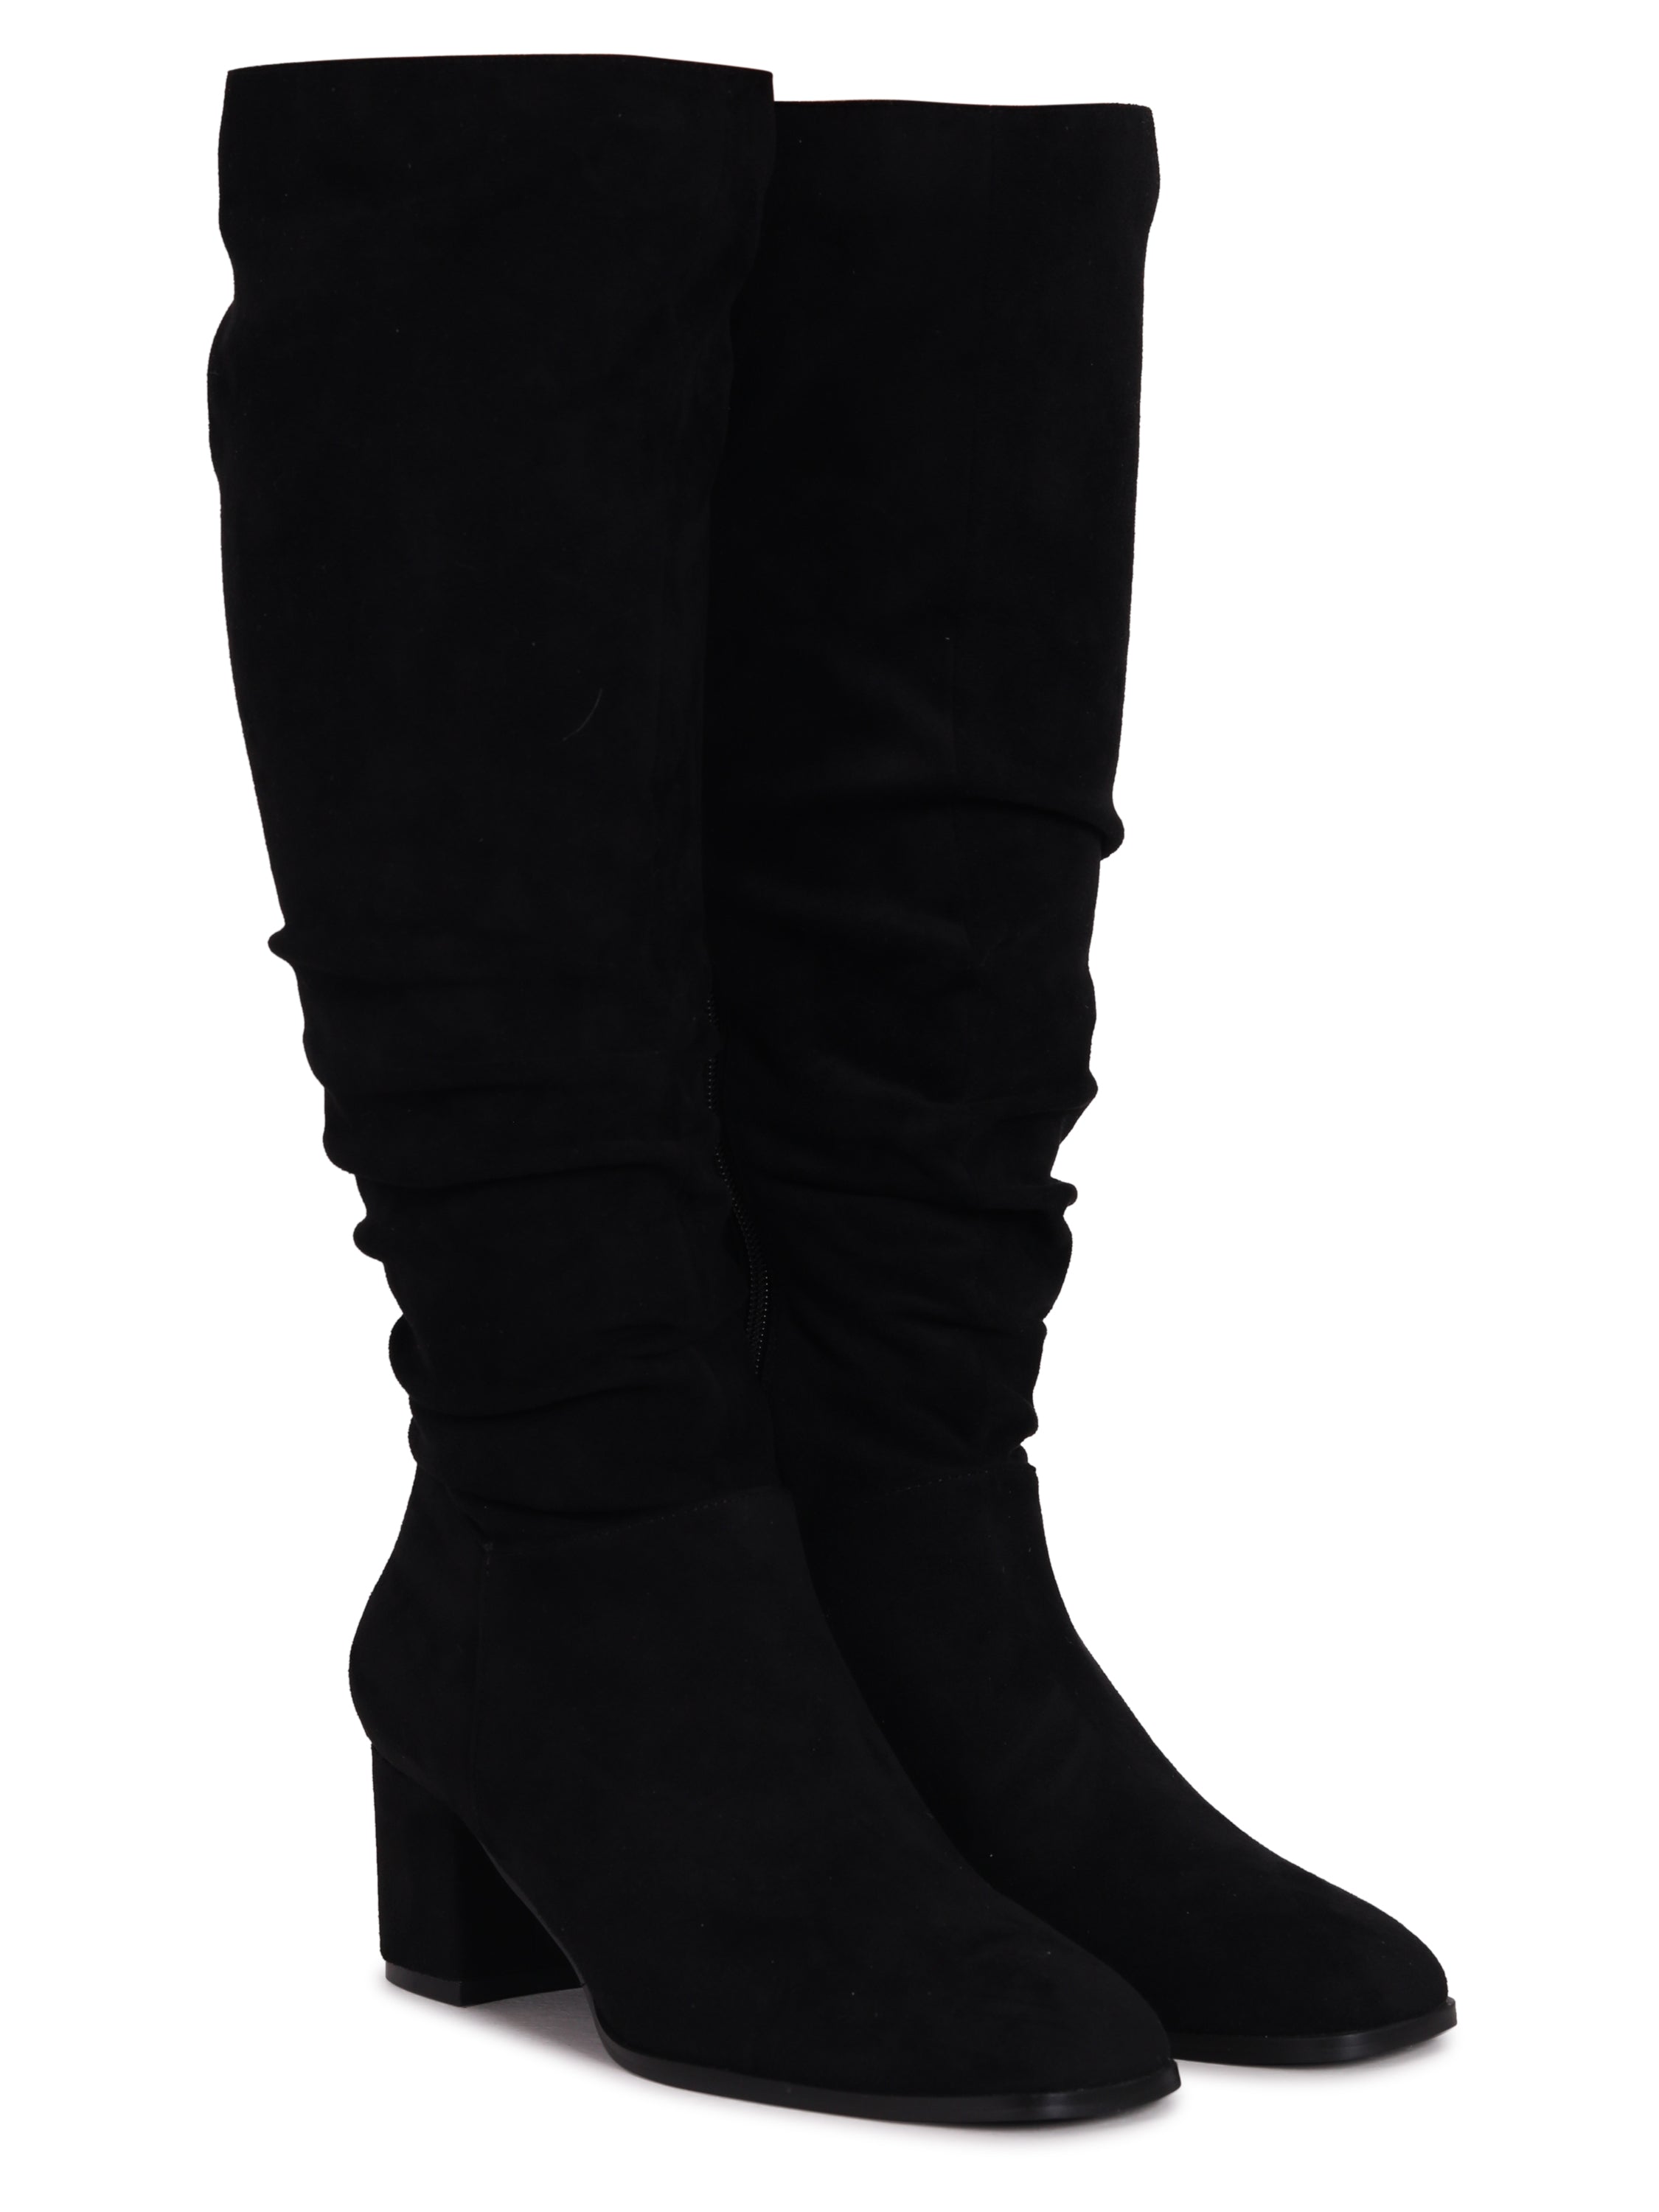 Black Faux Suede Knee High Block Heeled Ruched Boot With Square Toe – Linzi